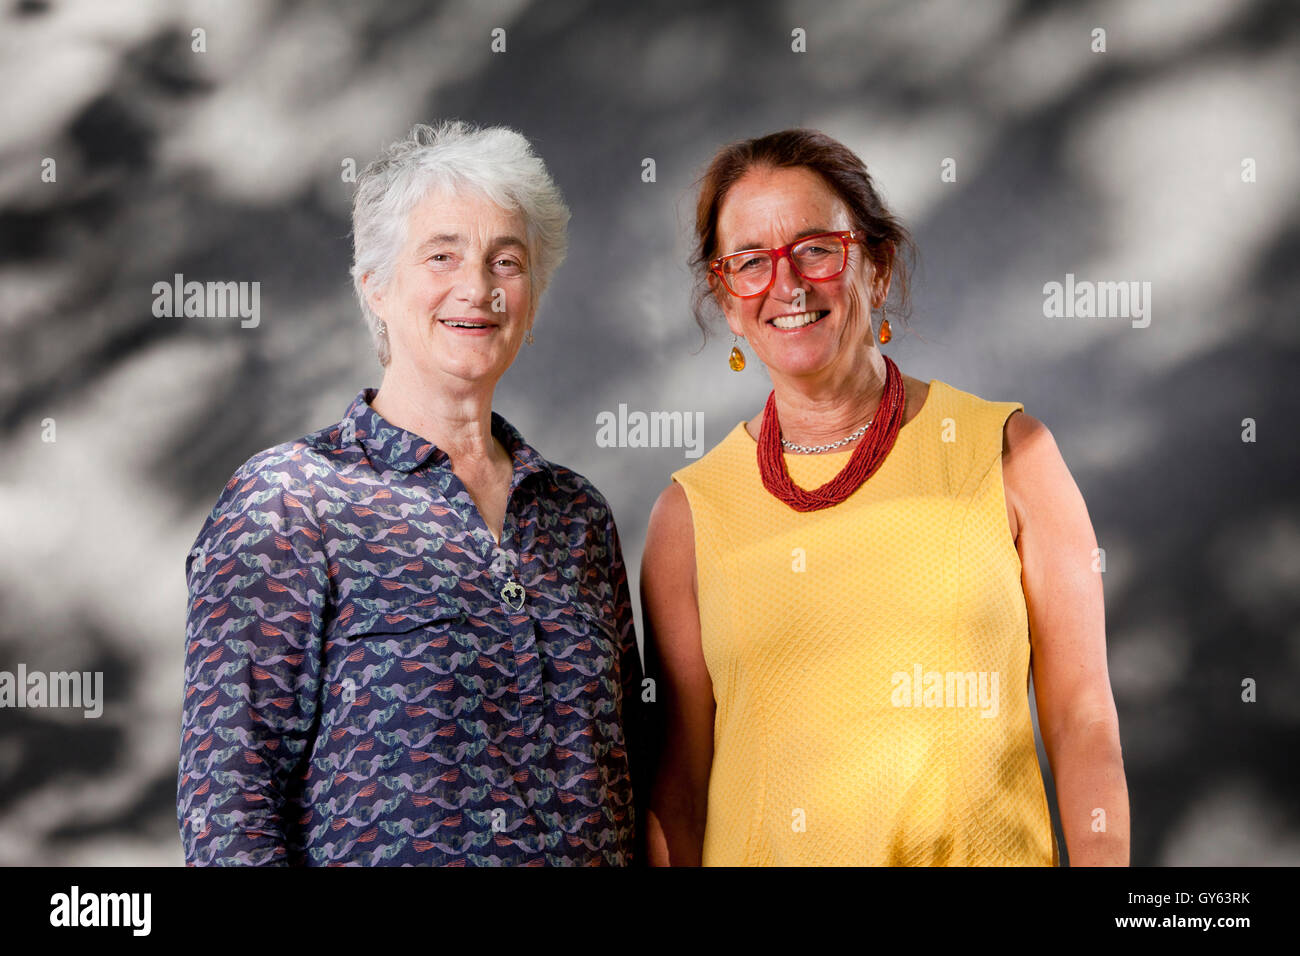 Valerie Gillies The Scottish Poet And Dr Lesley Morrison A Scottish G P And Creator Of A Book Of Poetry For Junior Doctors At The Edinburgh International Book Festival Edinburgh Scotland 22nd August